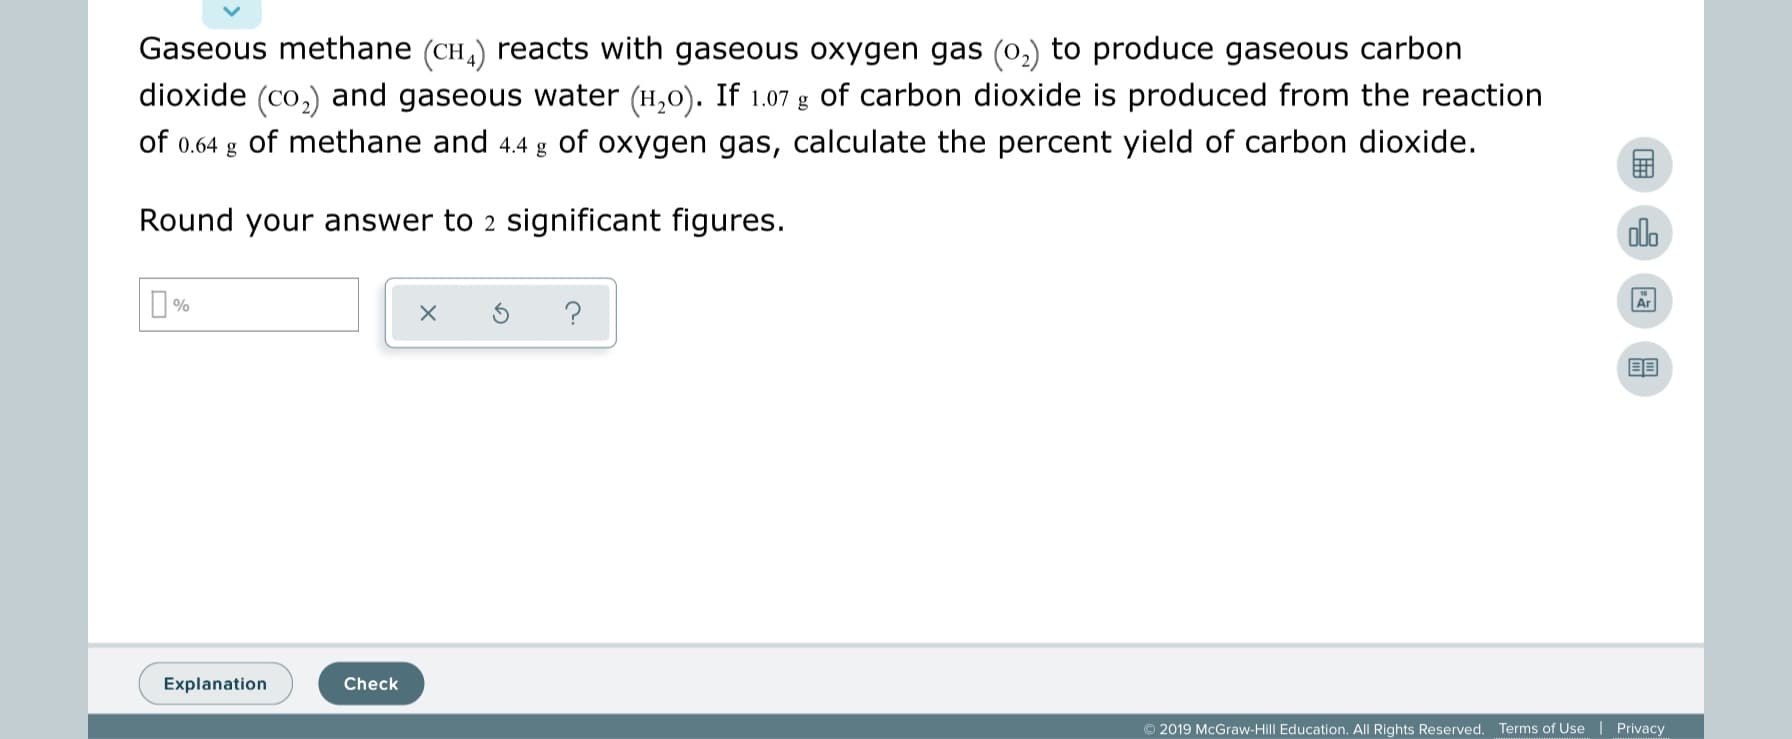 Gaseous methane (CH,) reacts with gaseous oxygen gas (0,) to produce gaseous carbon
dioxide (co,) and gaseous water (H,0). If 1.07 g of carbon dioxide is produced from the reaction
of 0.64 g of methane and 4.4 g of oxygen gas, calculate the percent yield of carbon dioxide.
Round your answer to 2 significant figures.
alo
Explanation
Check
© 2019 McGraw-Hill Education. All Rights Reserved. Terms of Use | Privacy
